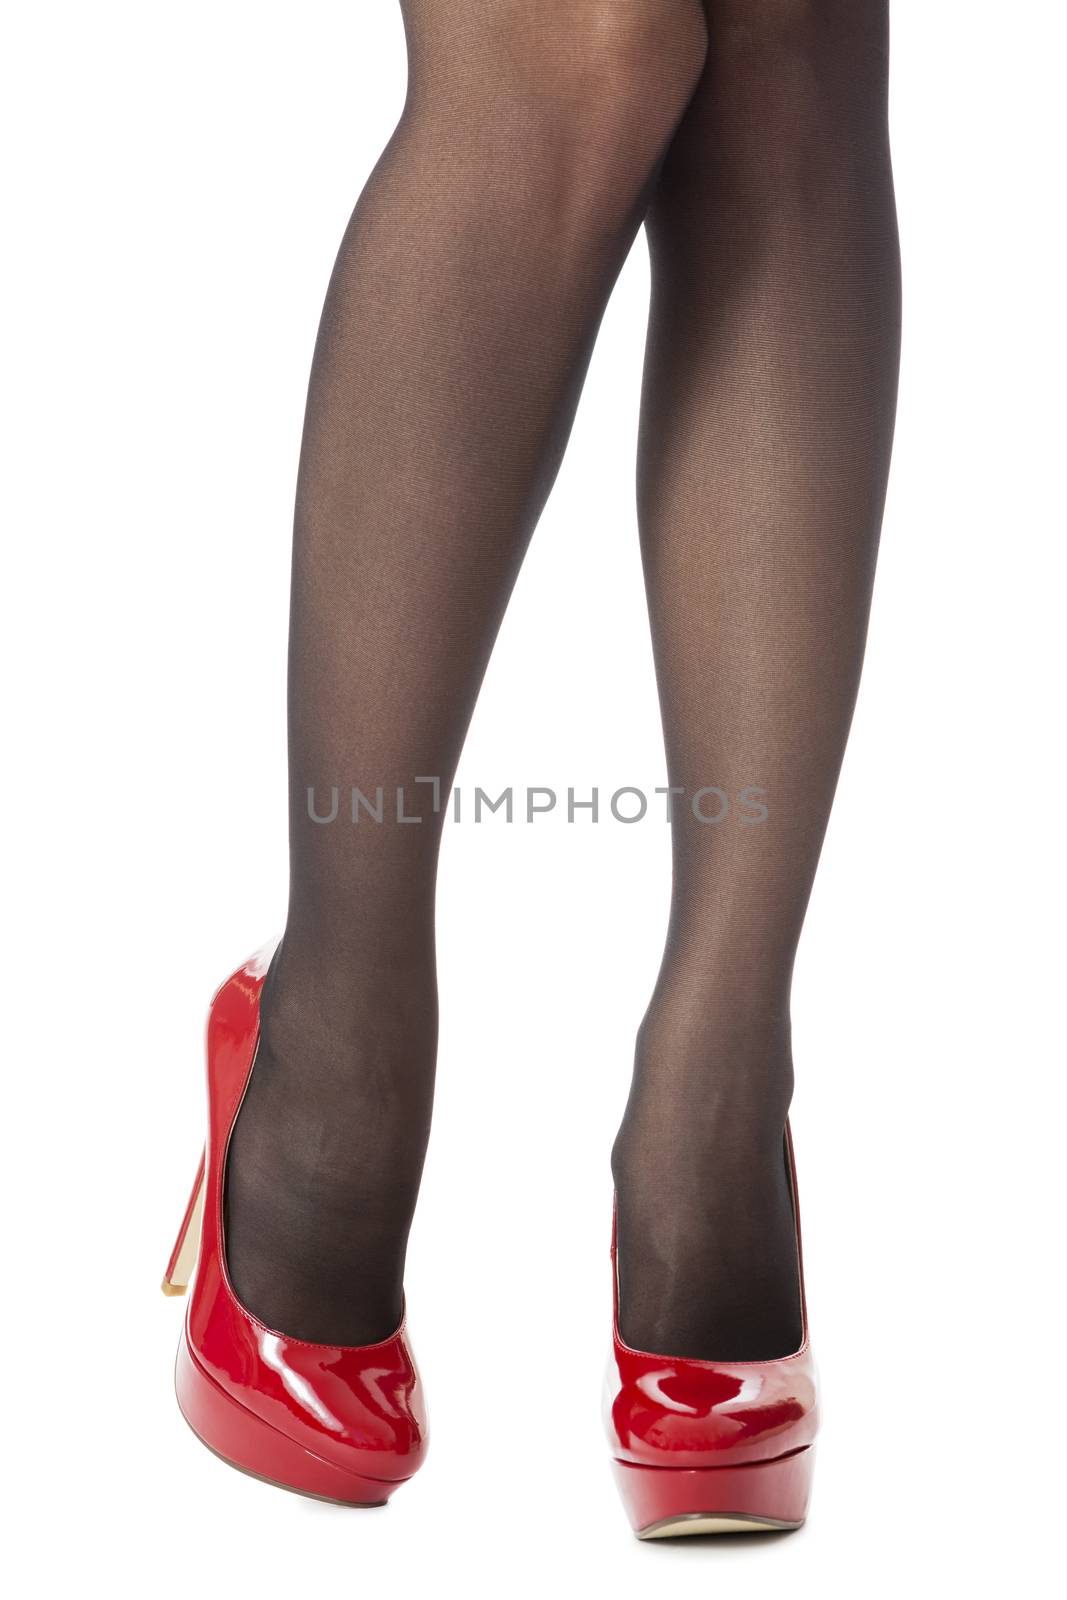 Woman Legs Wearing Red Shoes and Gray Stockings by juniart